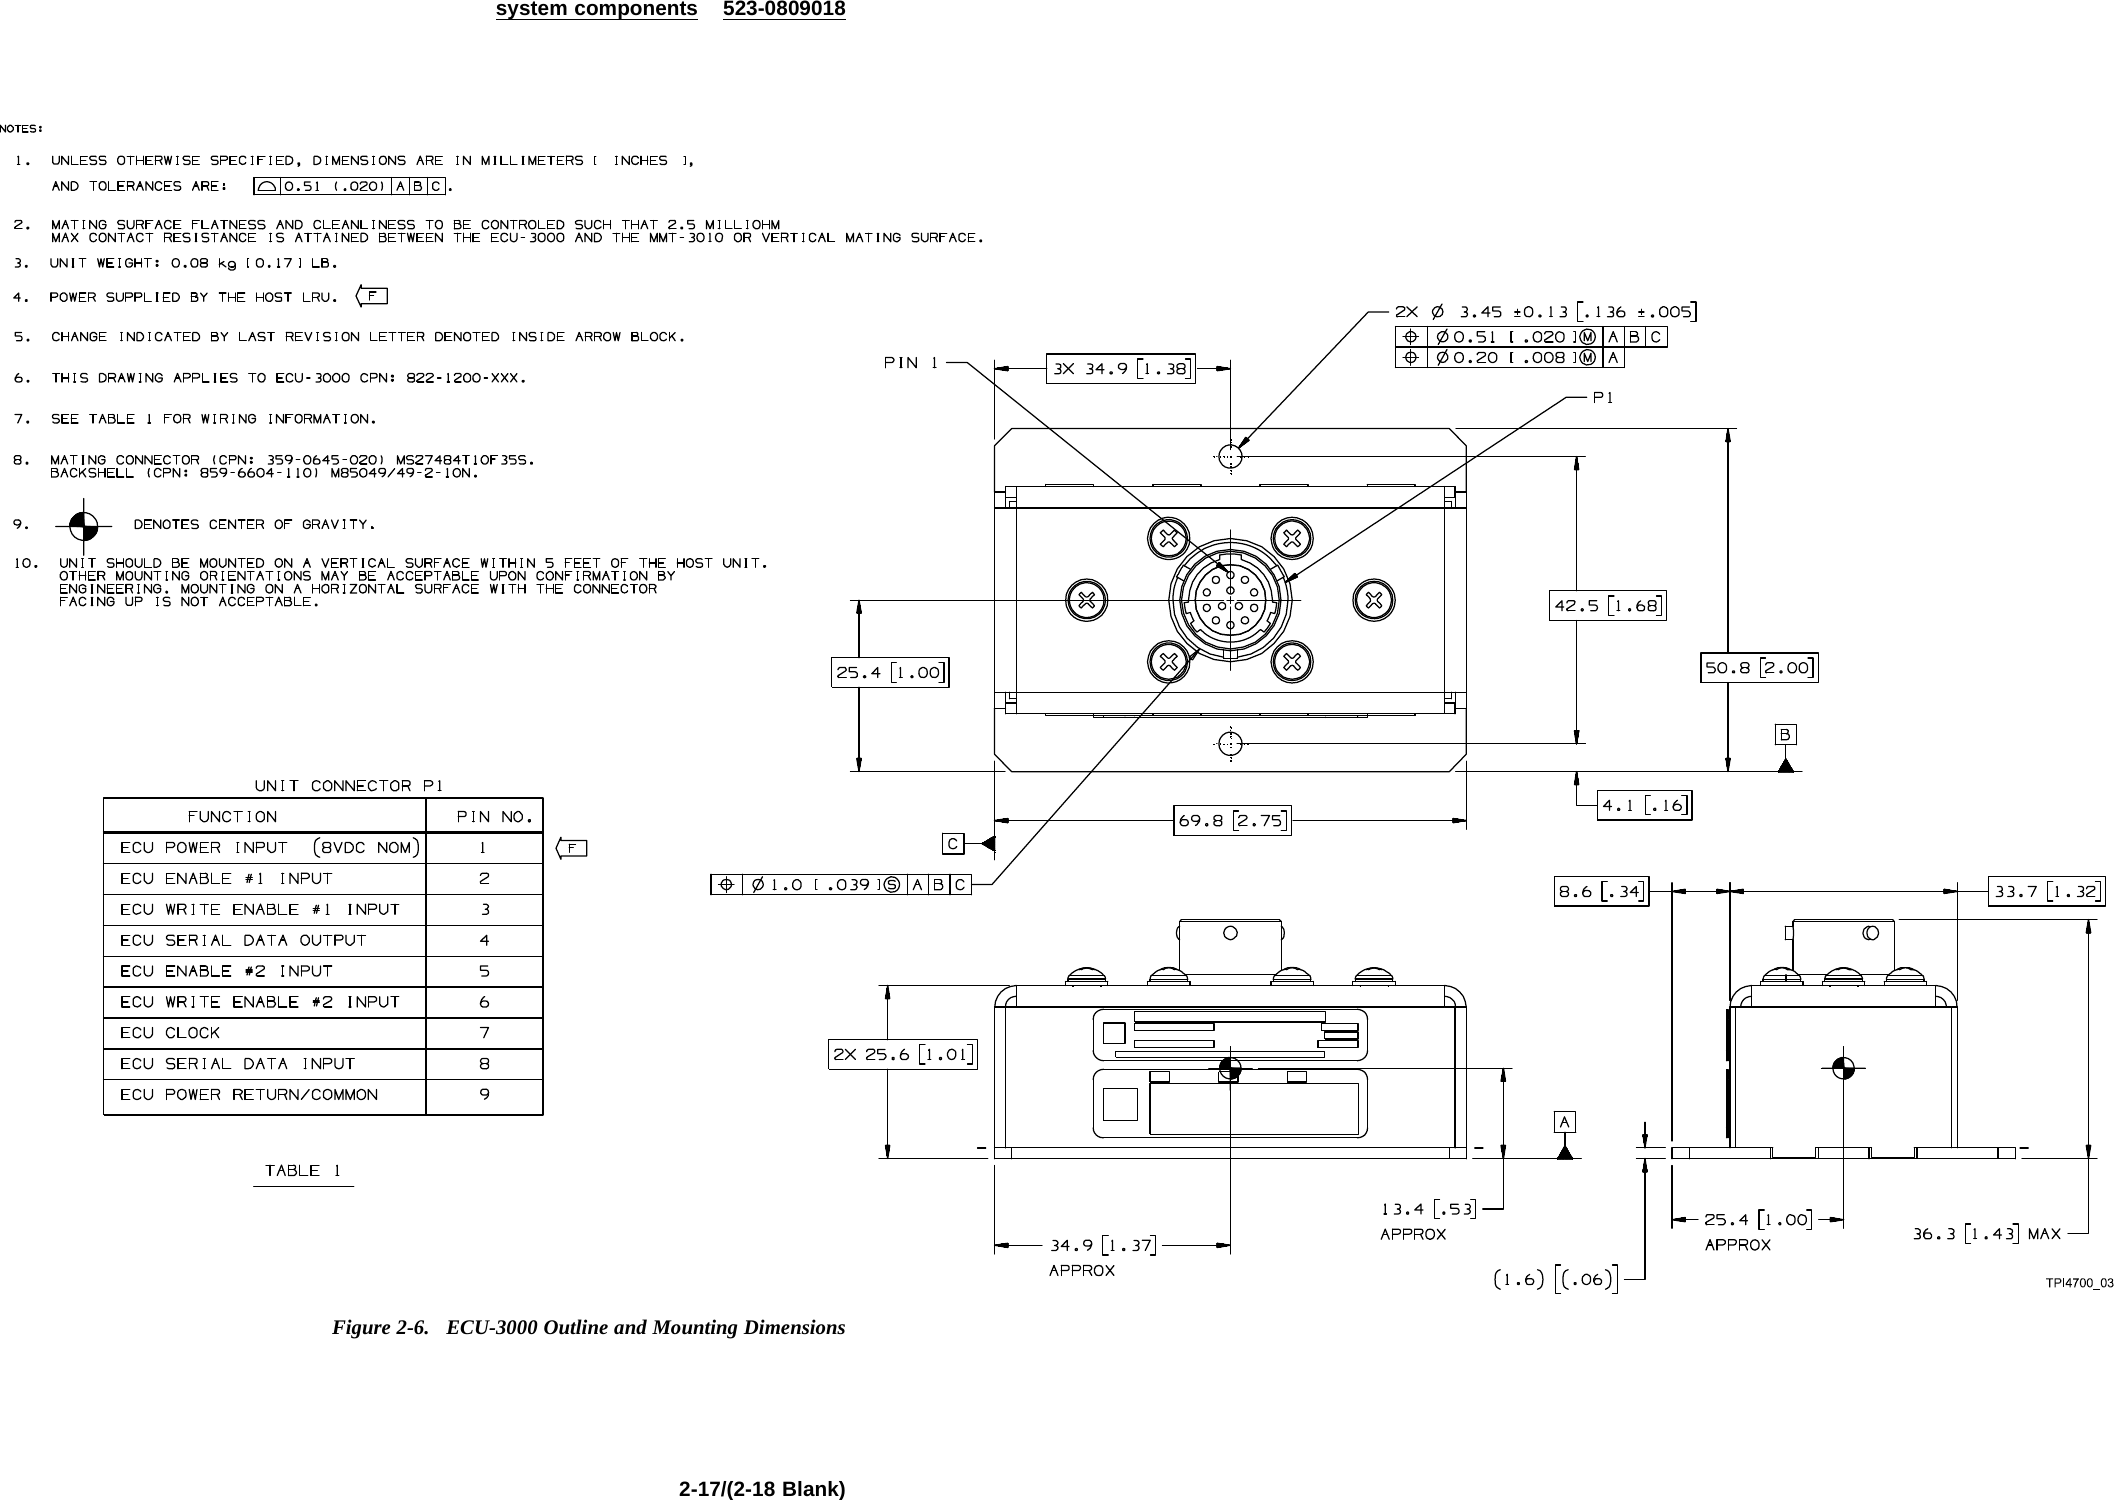 system components 523-0809018Figure 2-6. ECU-3000 Outline and Mounting Dimensions2-17/(2-18 Blank)